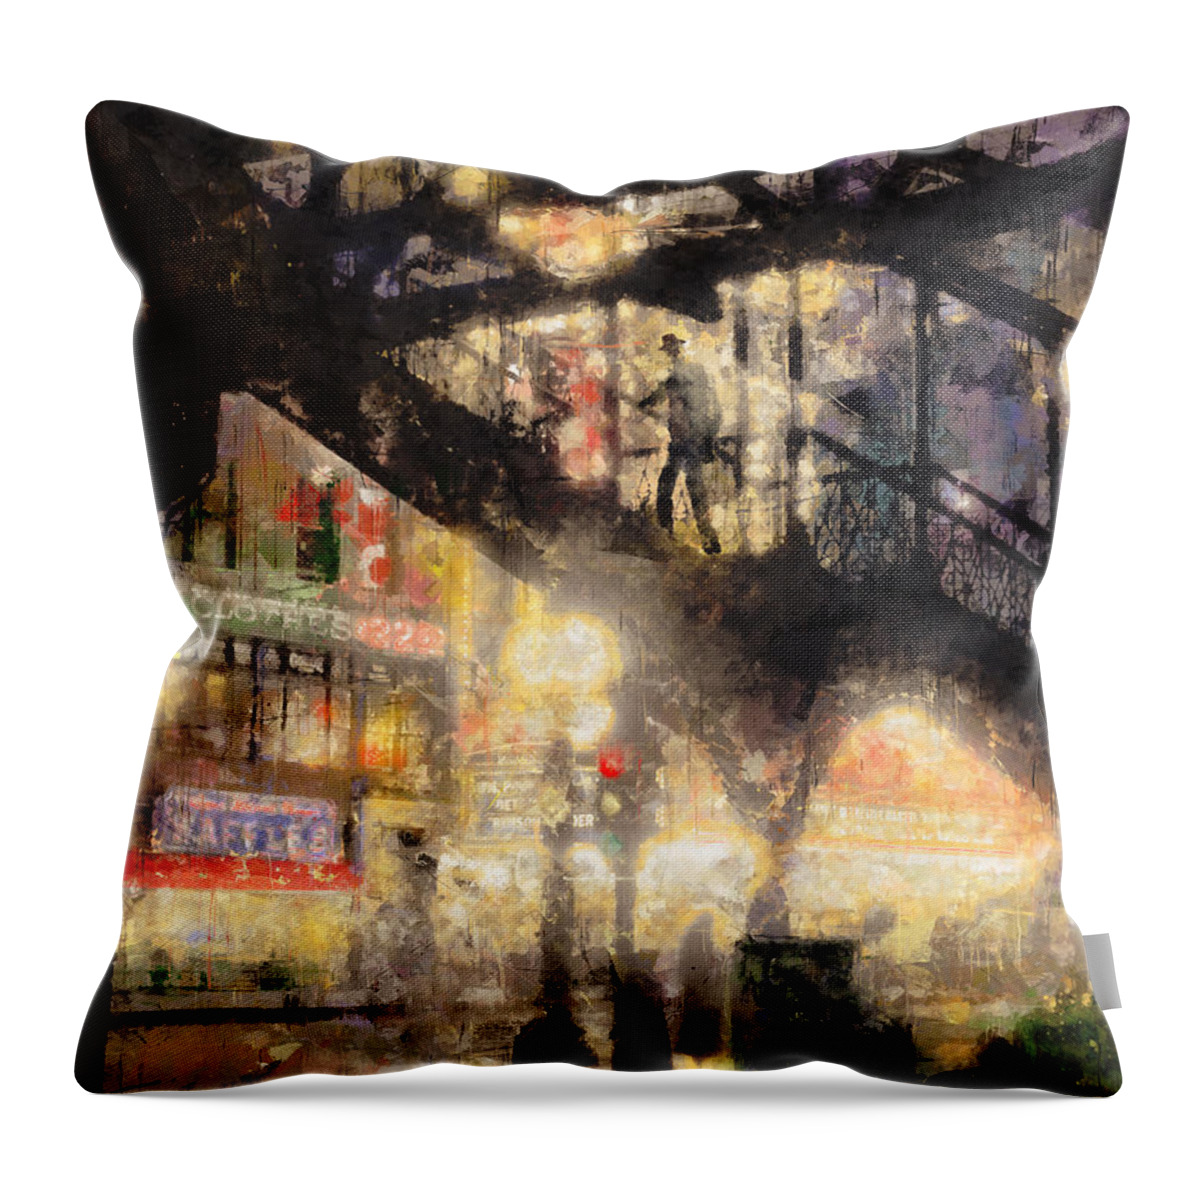 Chicago Throw Pillow featuring the mixed media Chicago Theater Lights by Glenn Galen